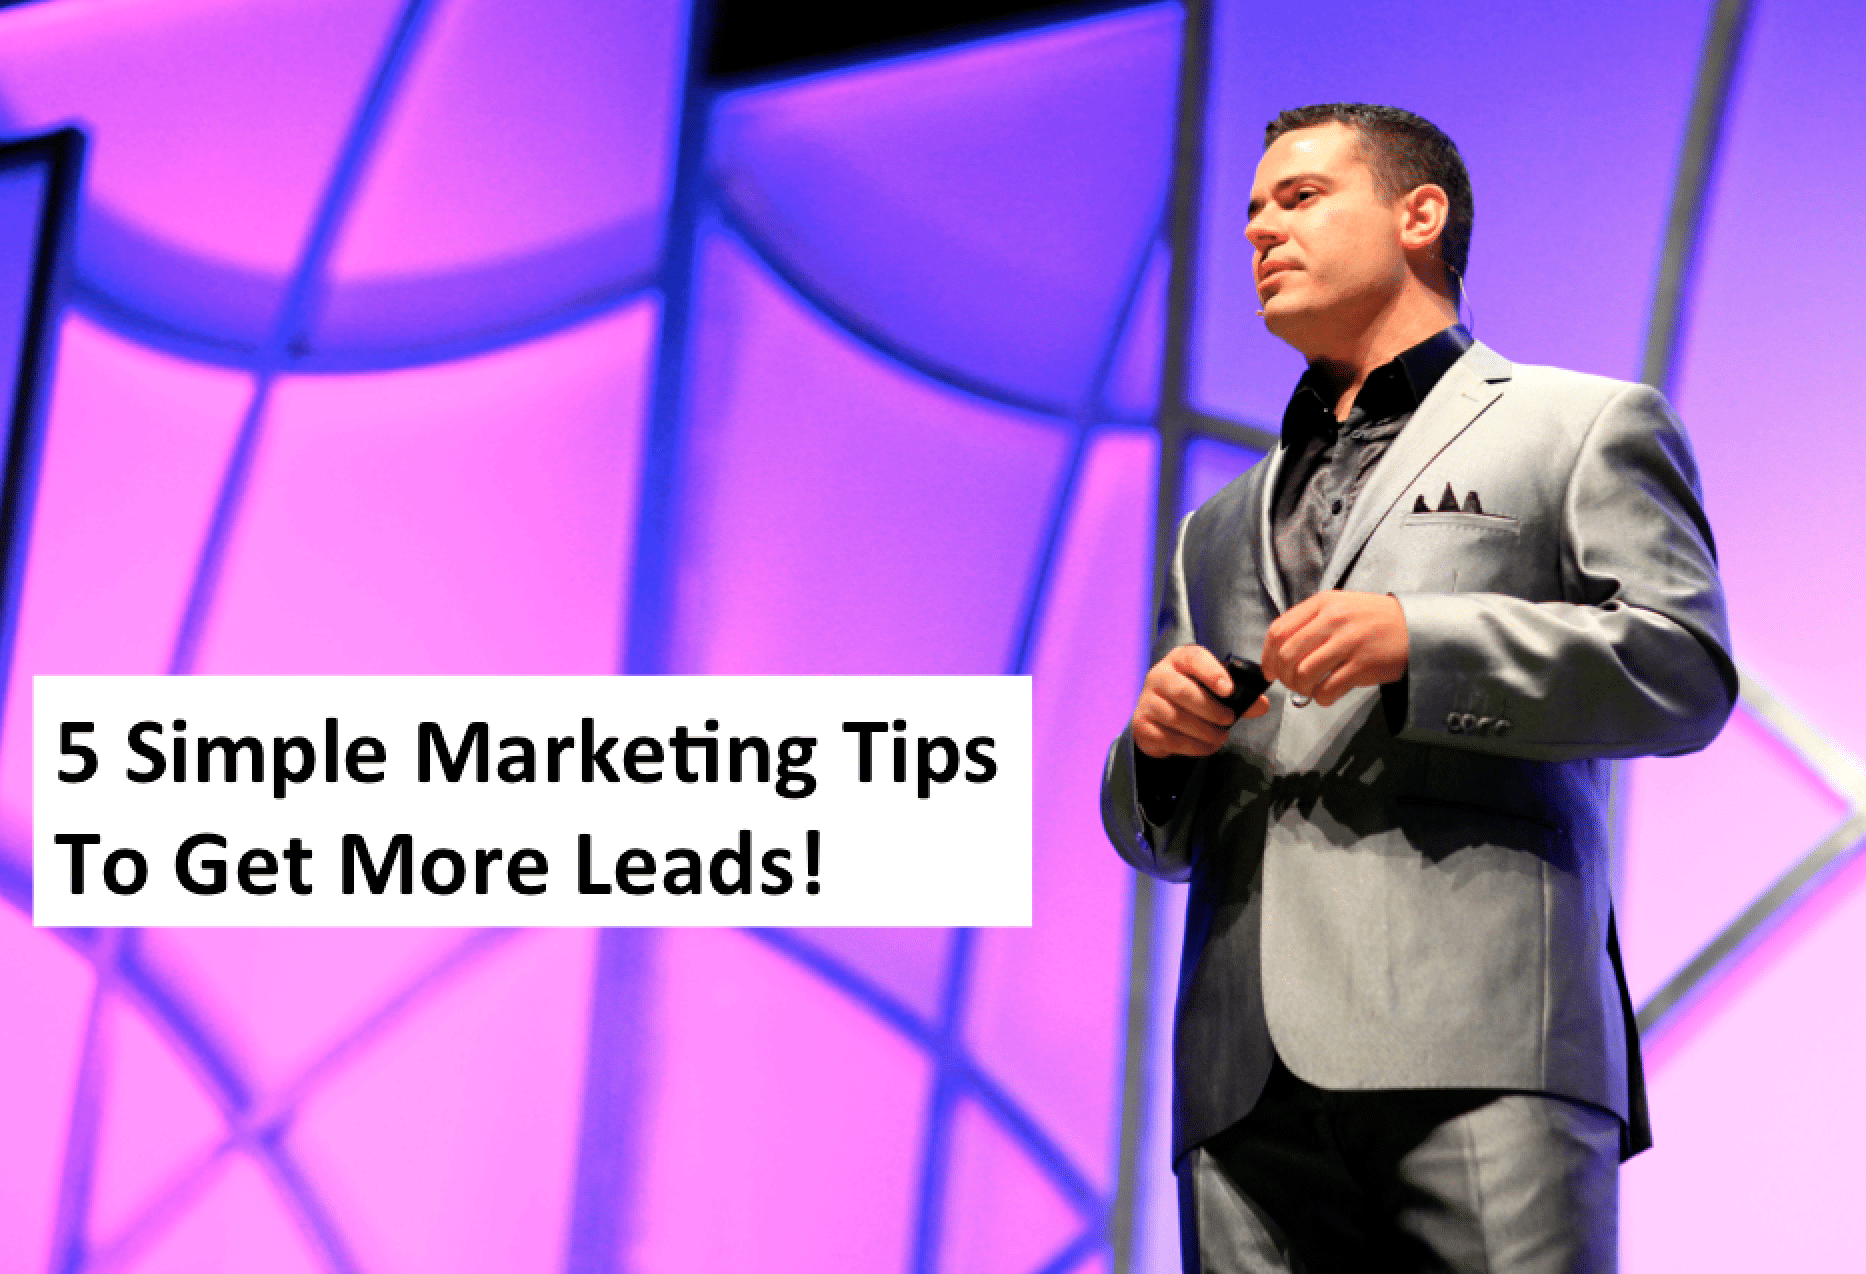 5 Online Marketing Tips to Get More Leads